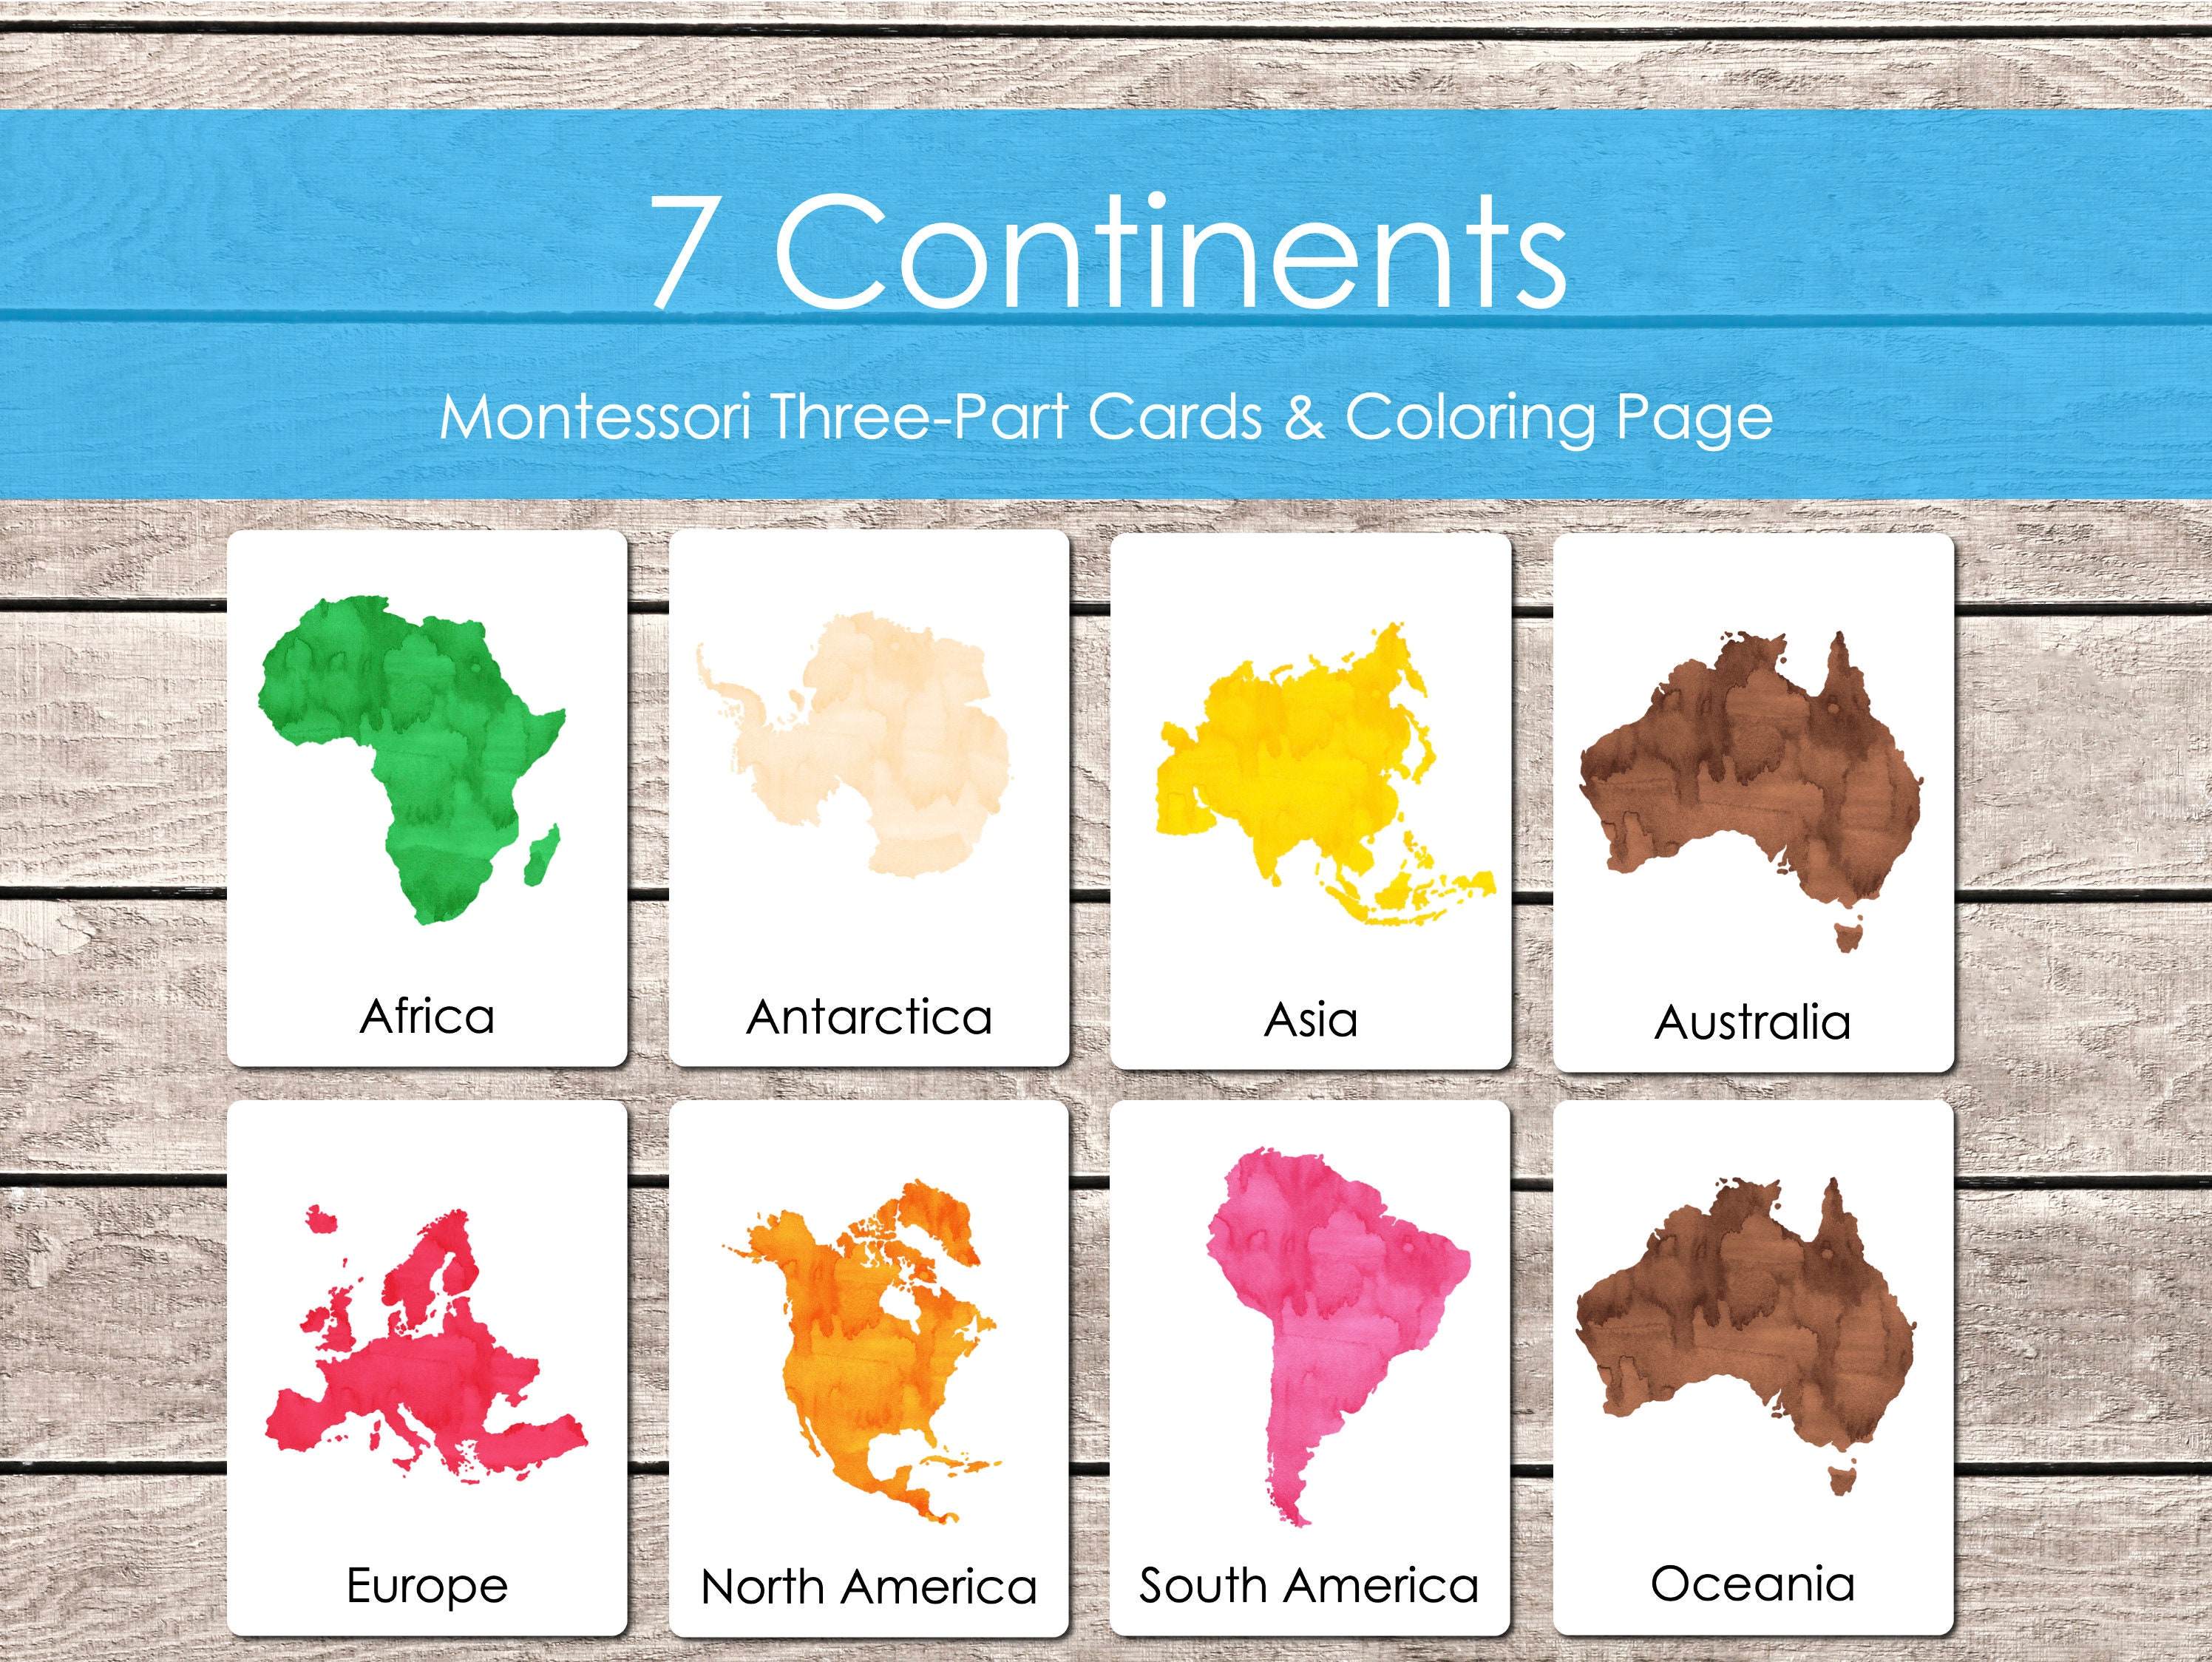 7 Continents Montessori Three Part Cards Continents image